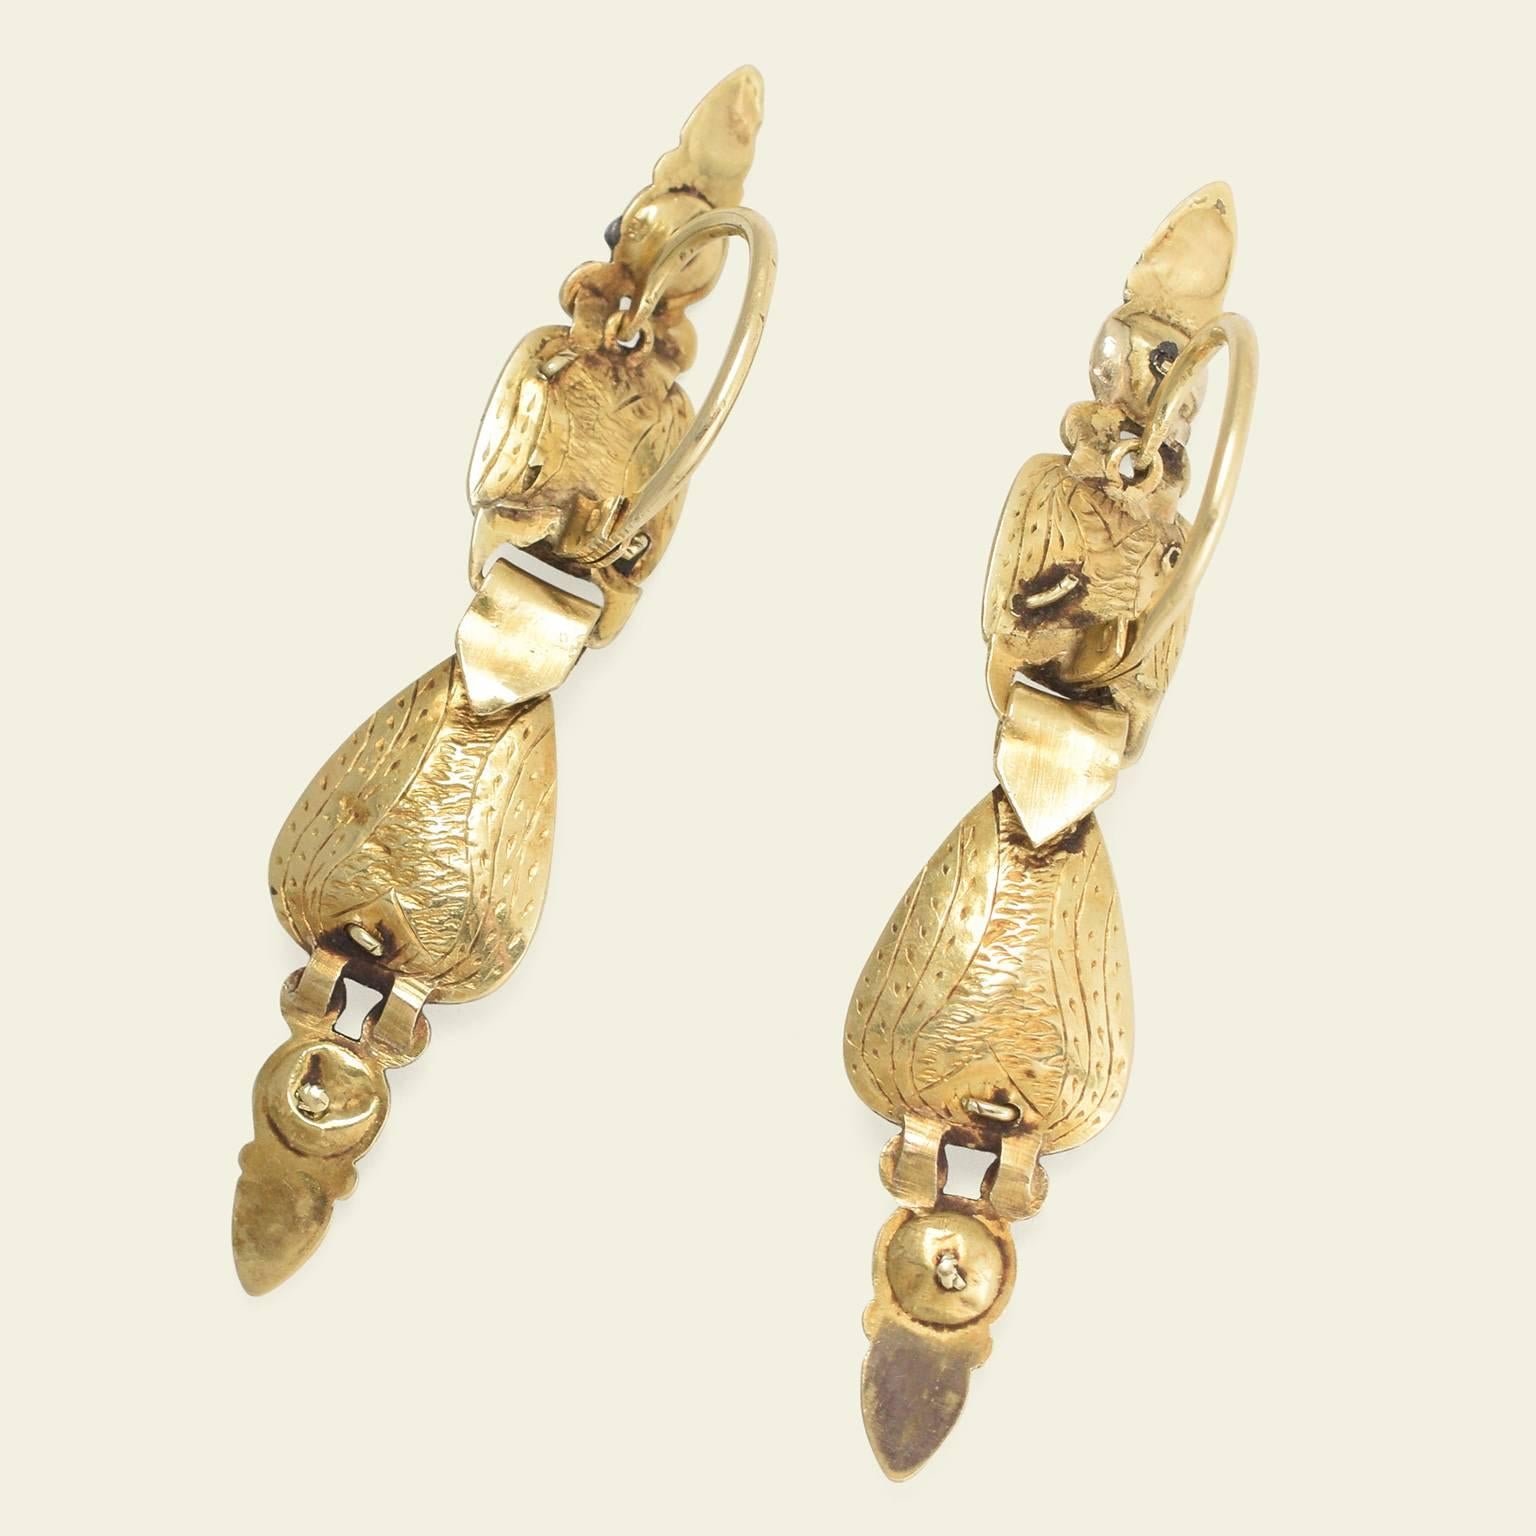 These Iberian earrings date to the late 18th century. Fashioned in 14k gold, these earrings are more minimal in style than much of the jewelry produced in the region during the late 1700s. The drops have a hollow construction, making them relatively